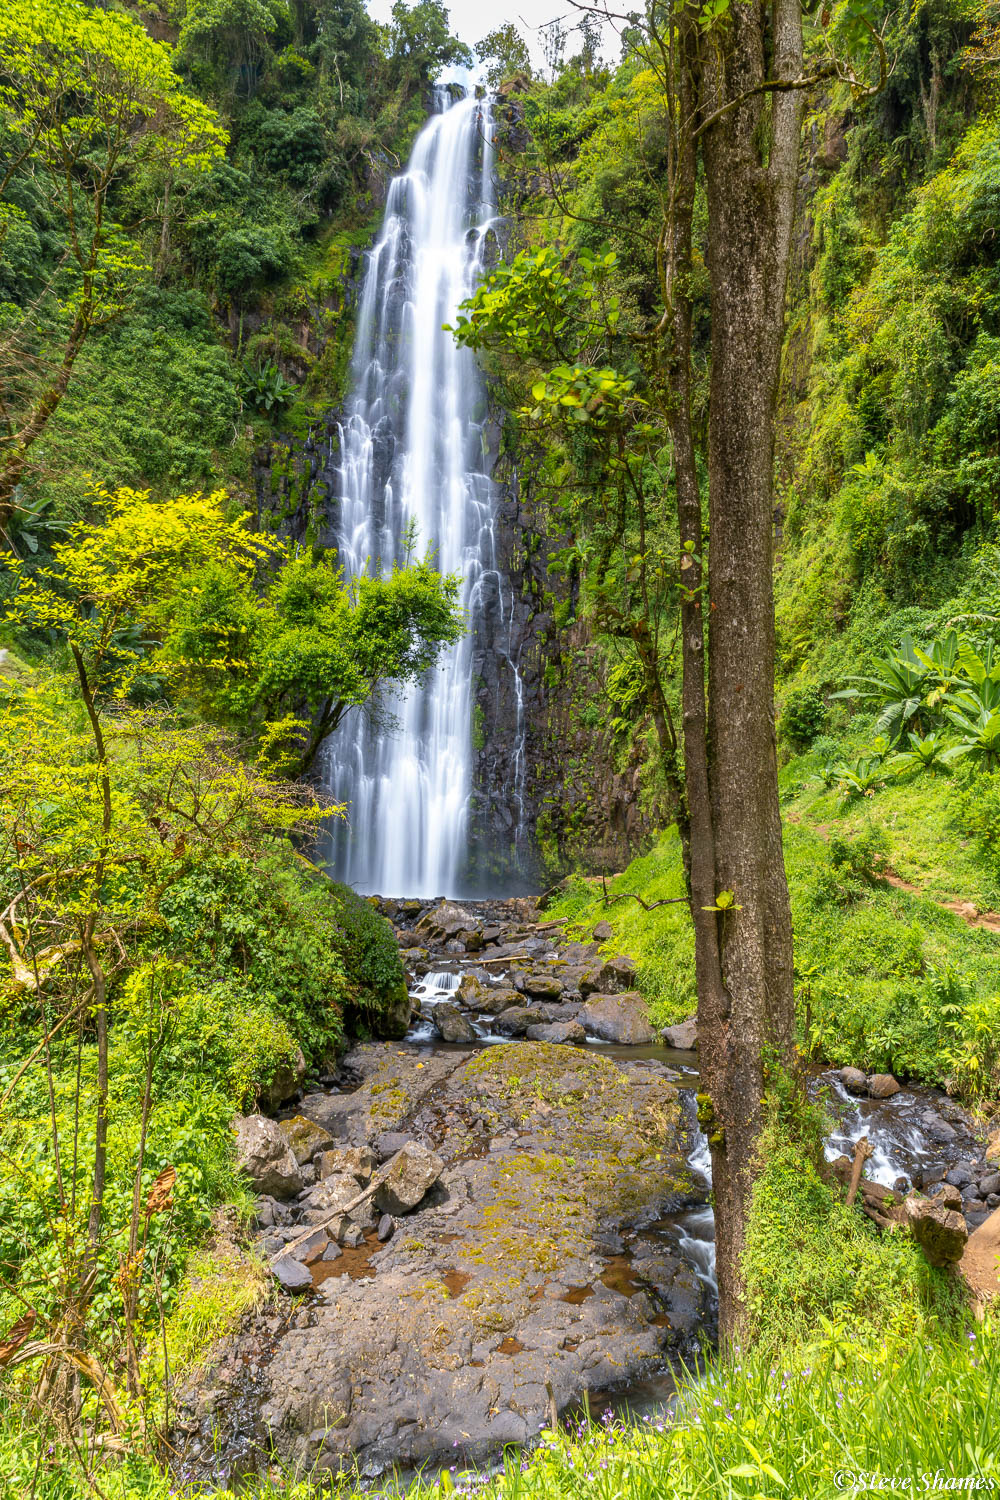 Here is the scenic Materuni Waterfall. On the lower slopes of Mt. Kilimanjaro.